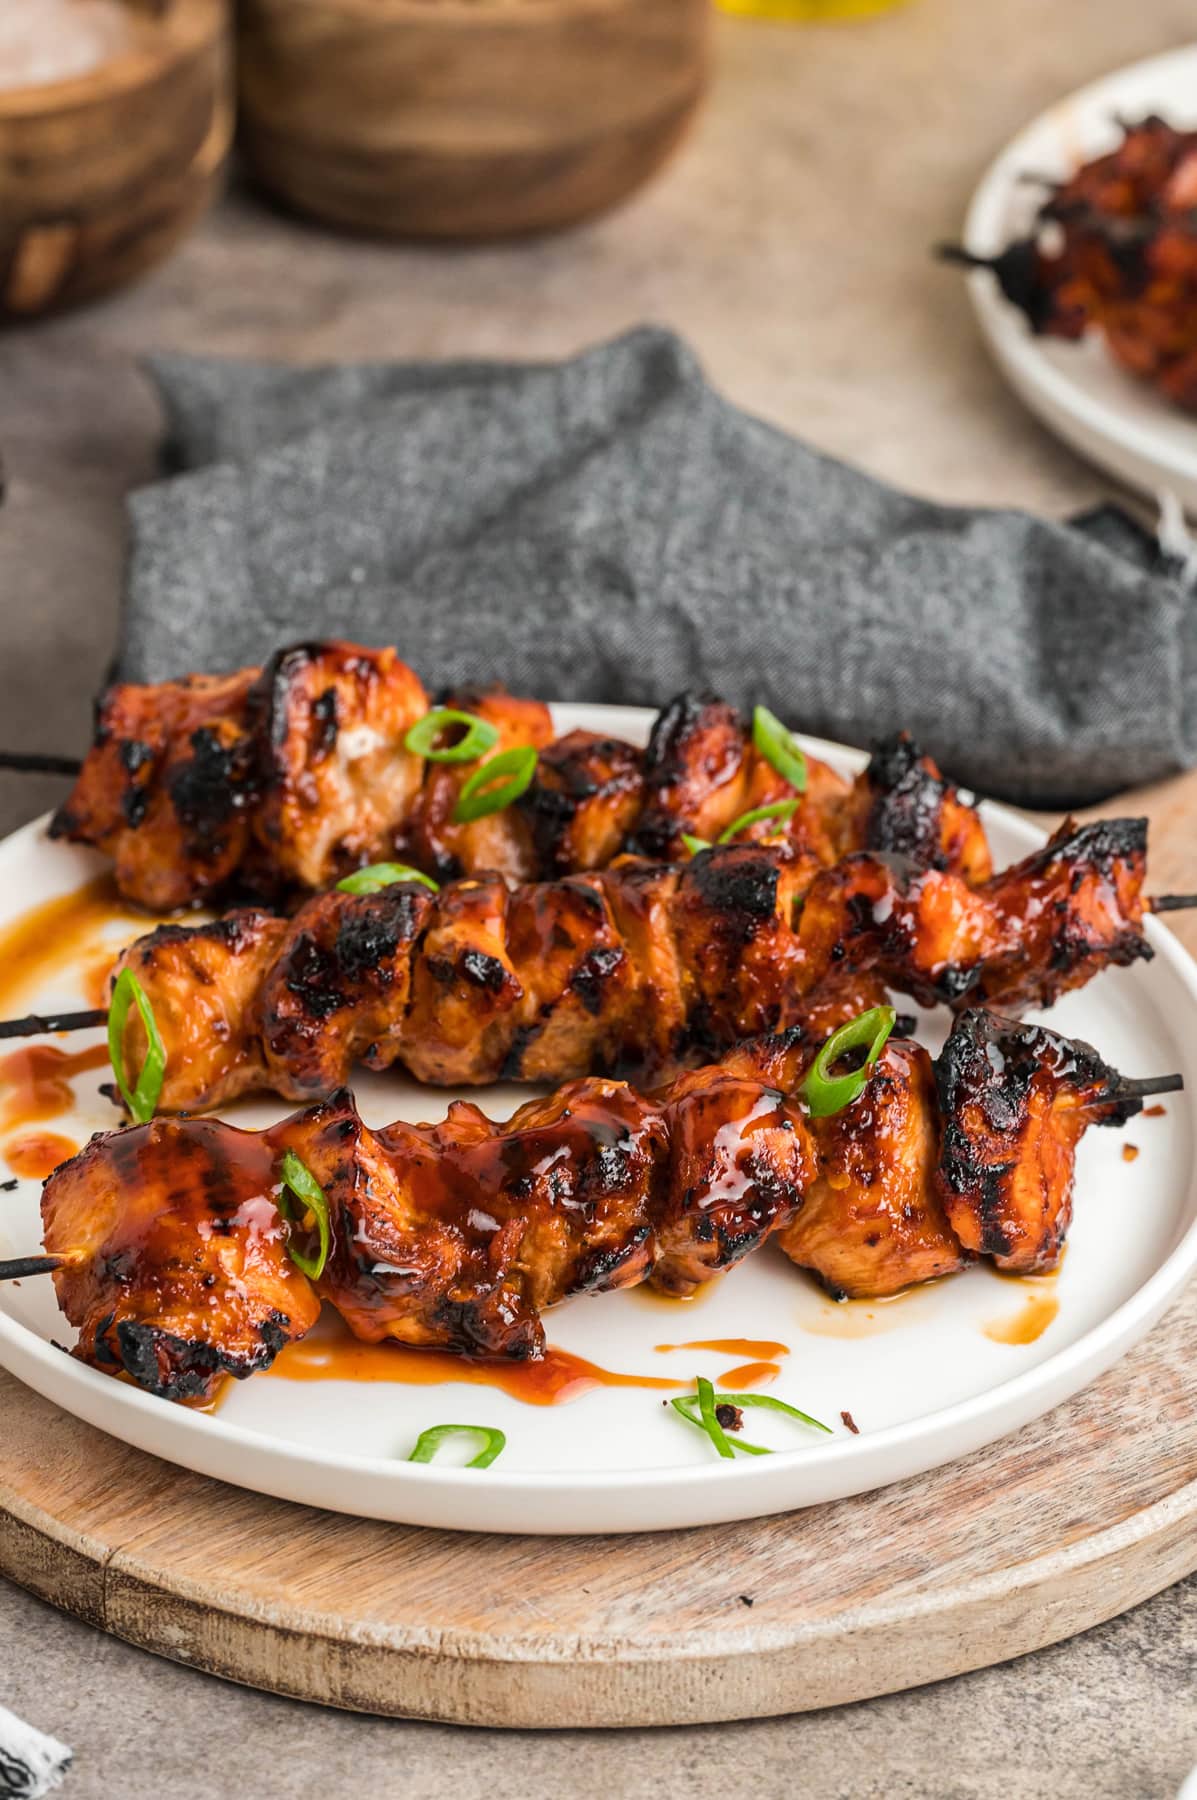 Chicken skewers on a plate